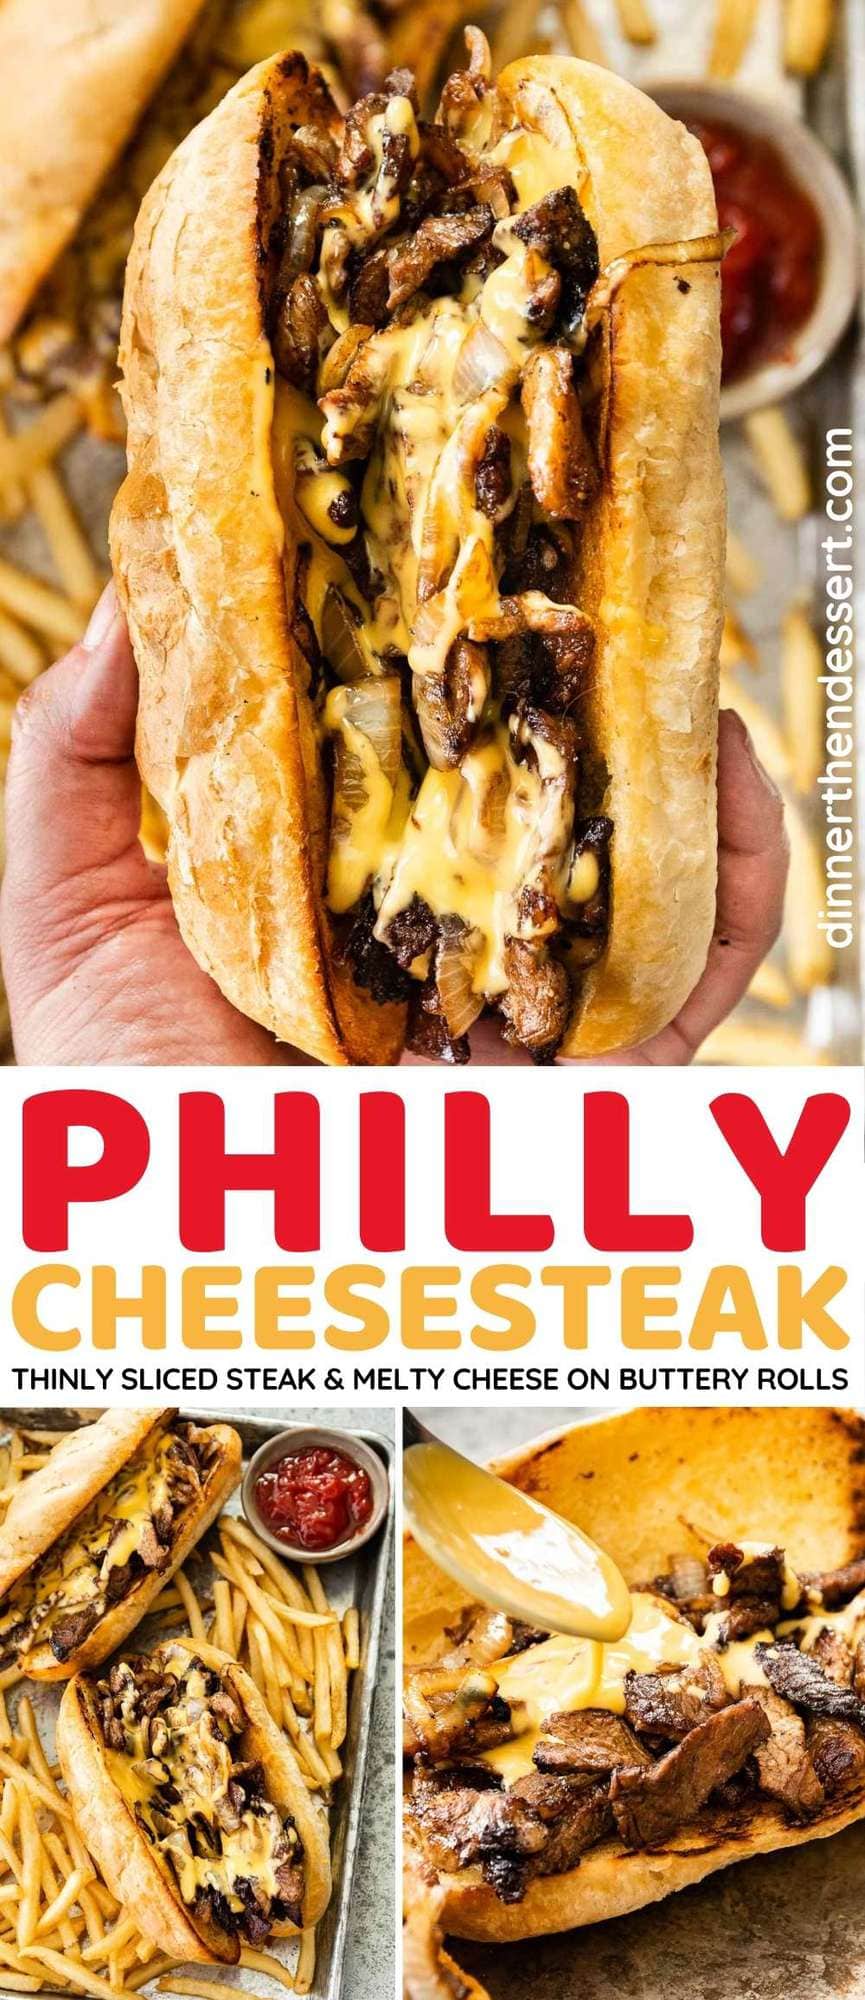 Philly Cheesesteak Collage